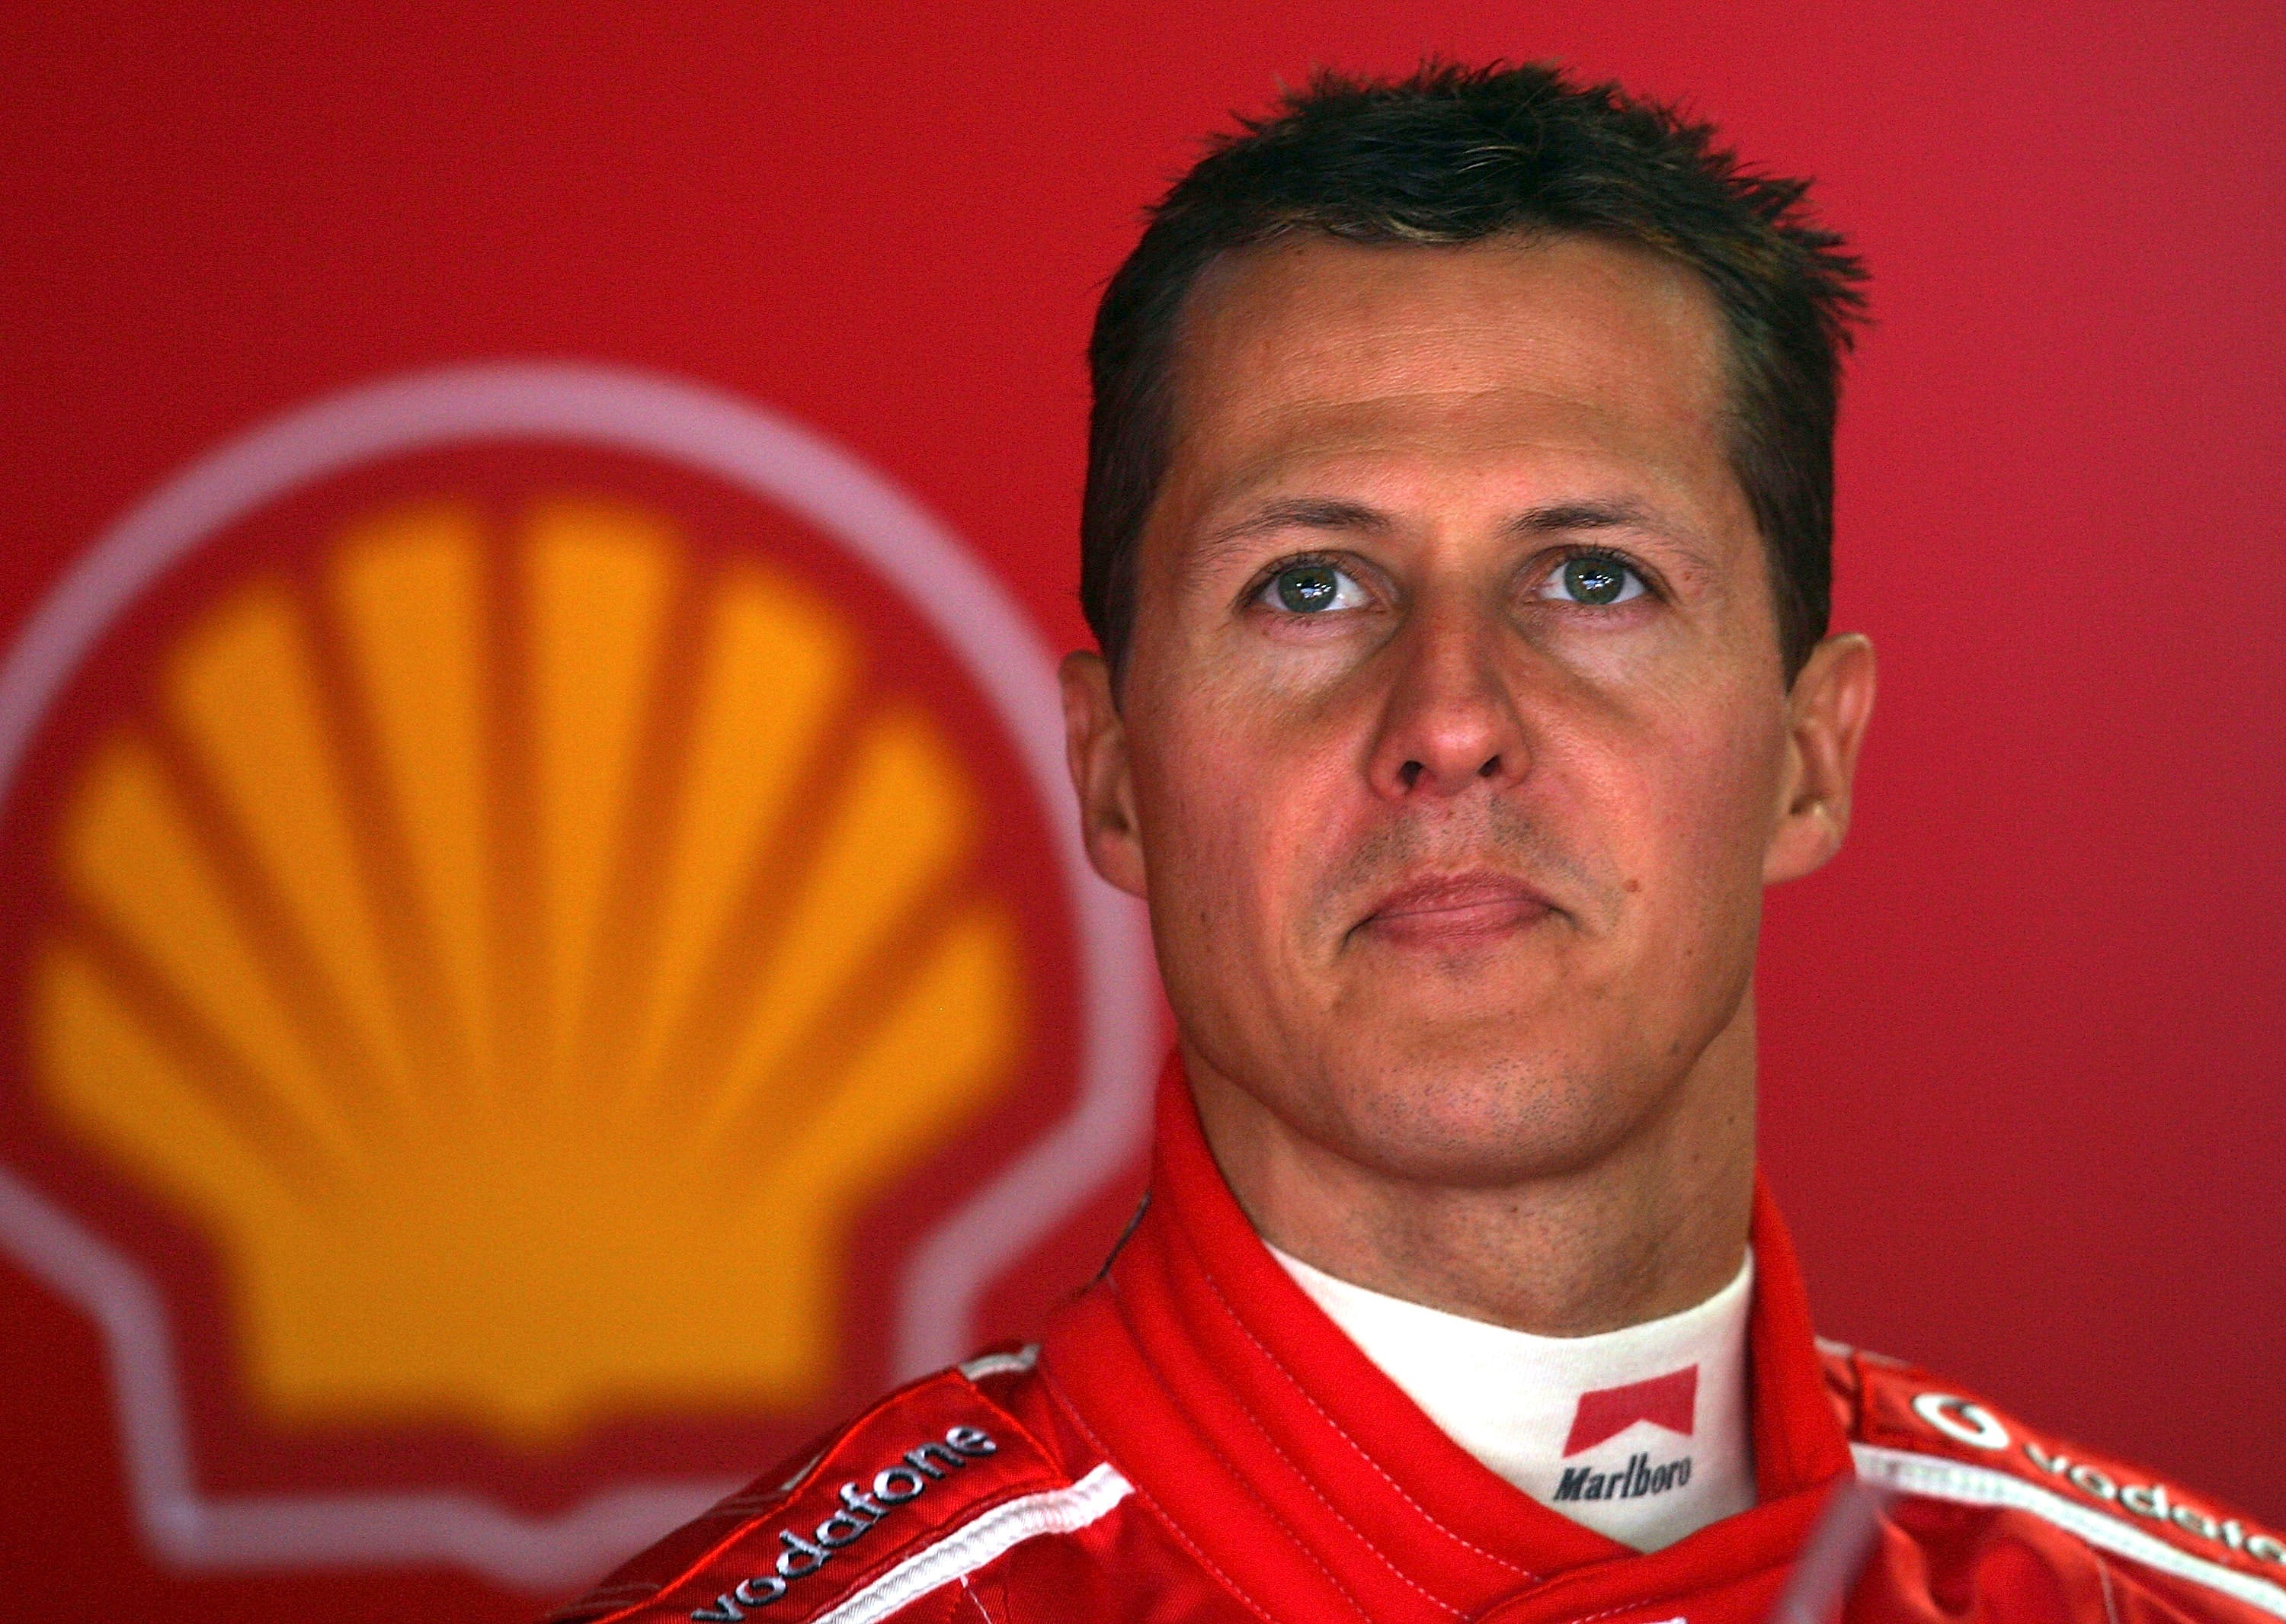 Michael Schumacher has not been seen publicly for nearly 10 years